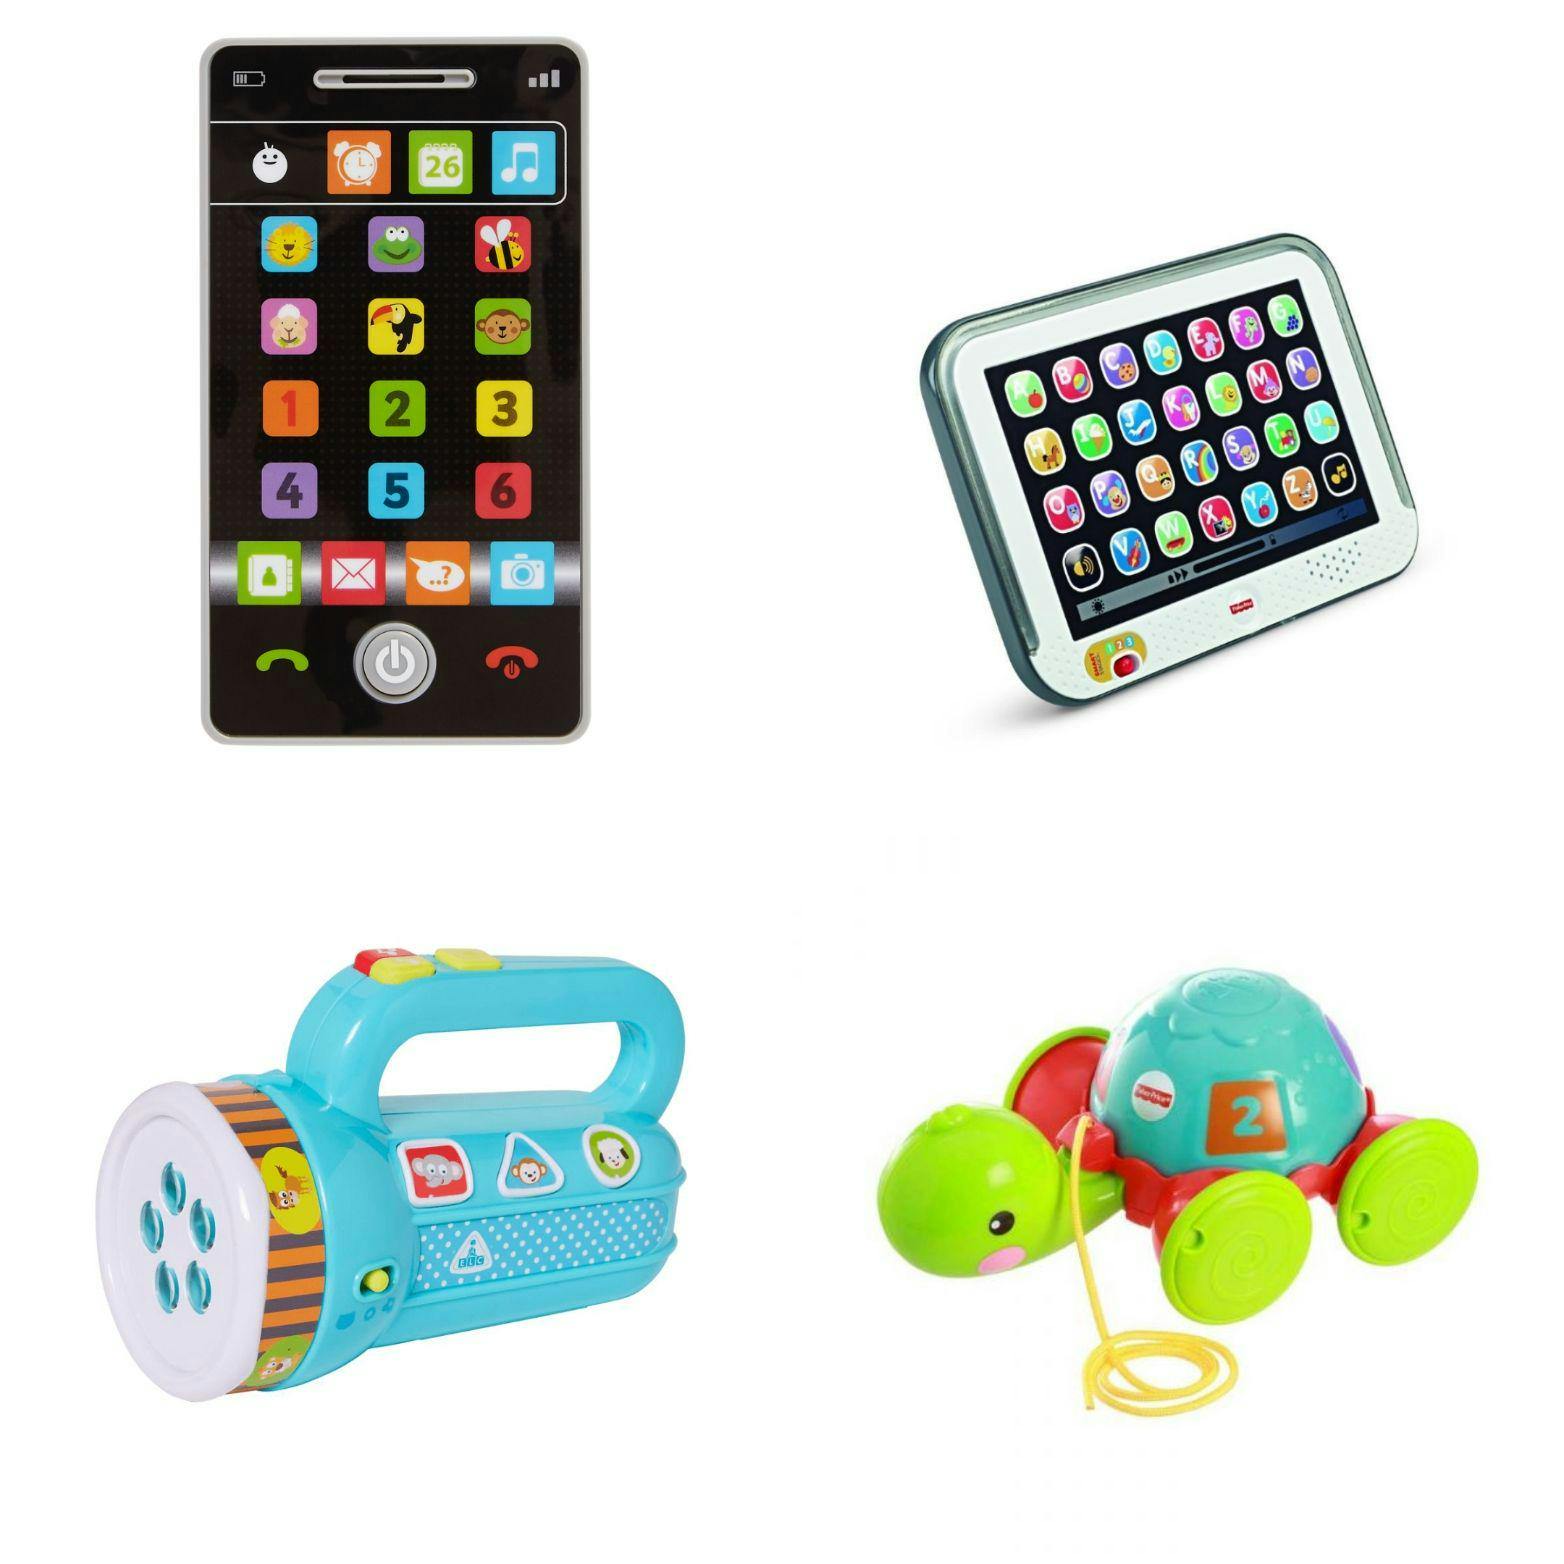 Image 6499 of Toys 13 : ELC Little Learning Phone, ELC My First Torch, Fisher Price Laugh & Learn Smart Stages Tablet, Fisher Price Pull Along Turtle